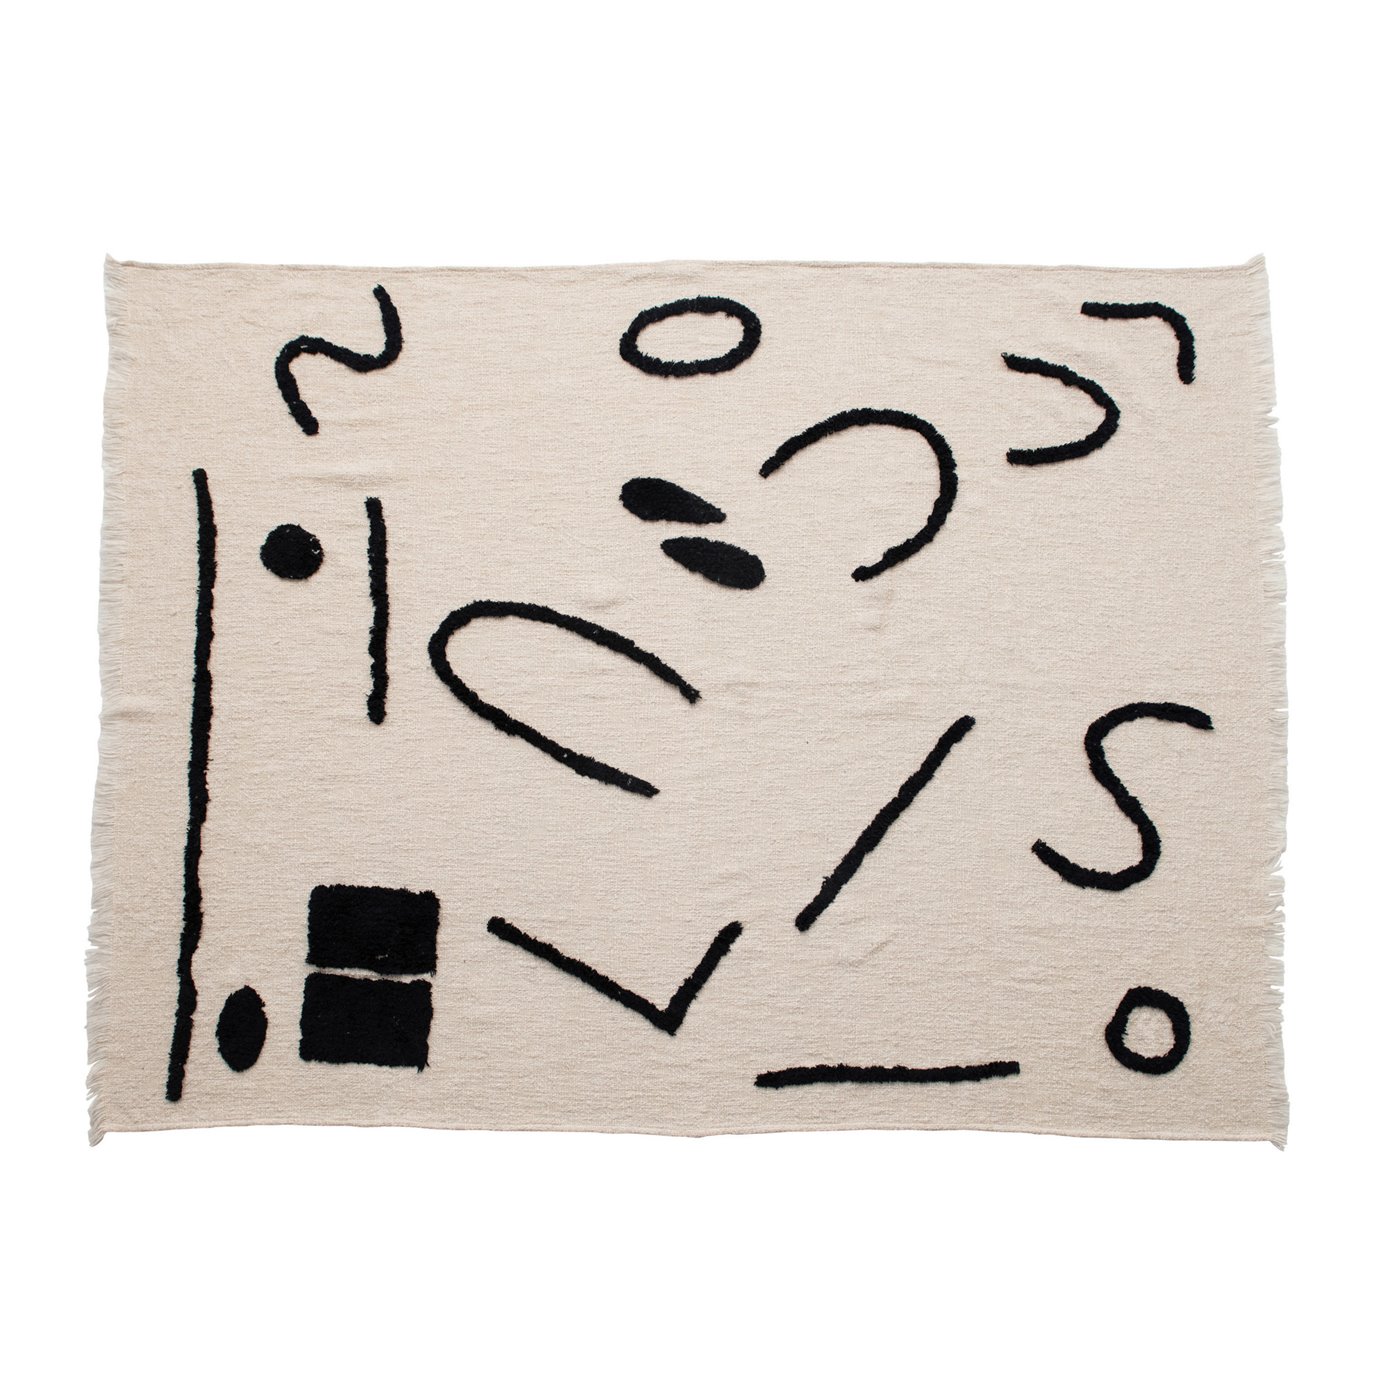 Cotton Blend Throw with Abstract Print & Frayed Edges, Cream Color & Black